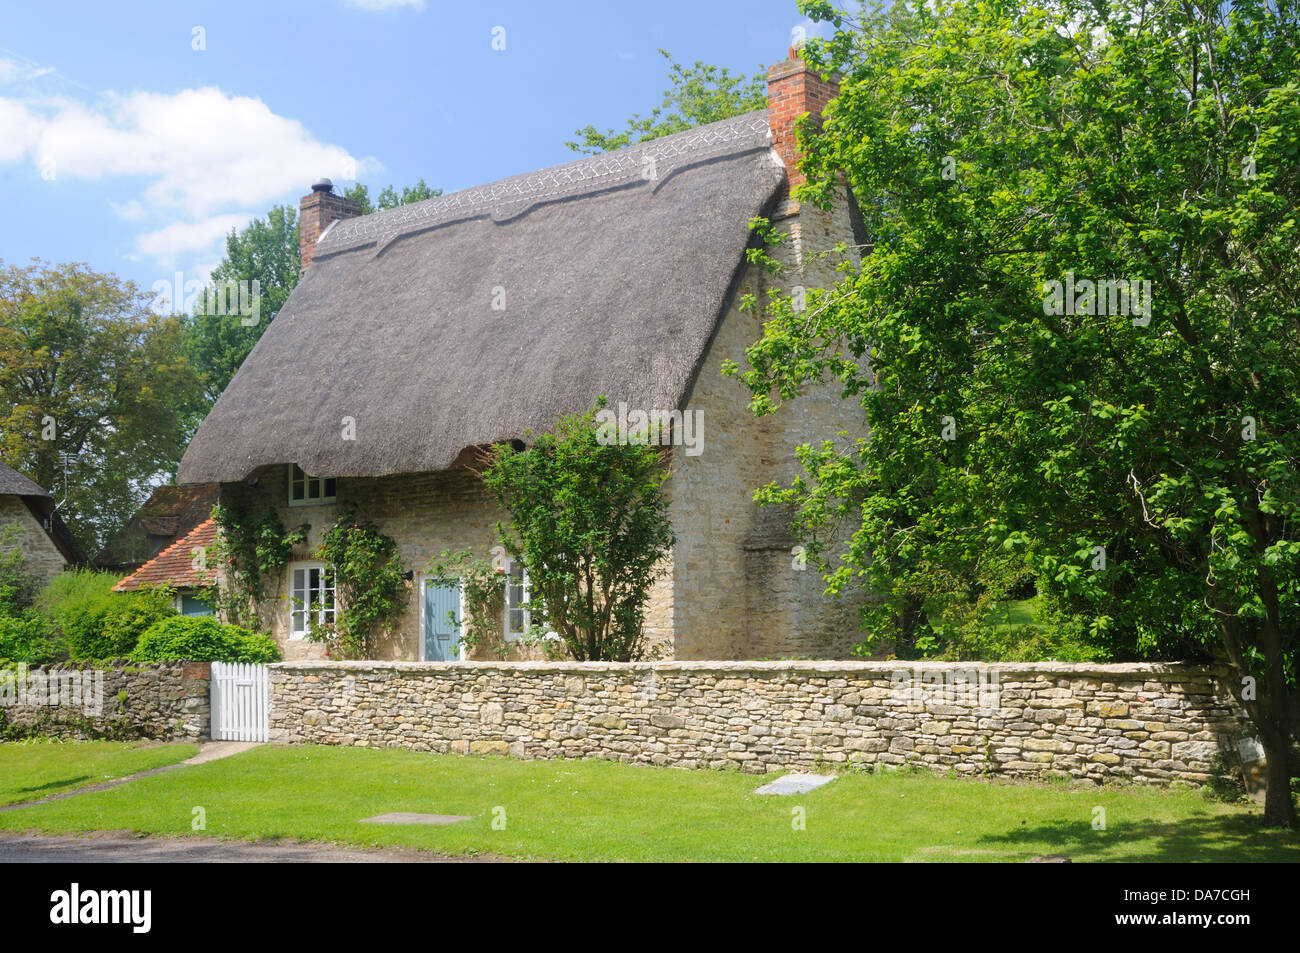 Mitte 18. c. Reetdachhaus in Little Haseley, Oxfordshire, England Stockfoto